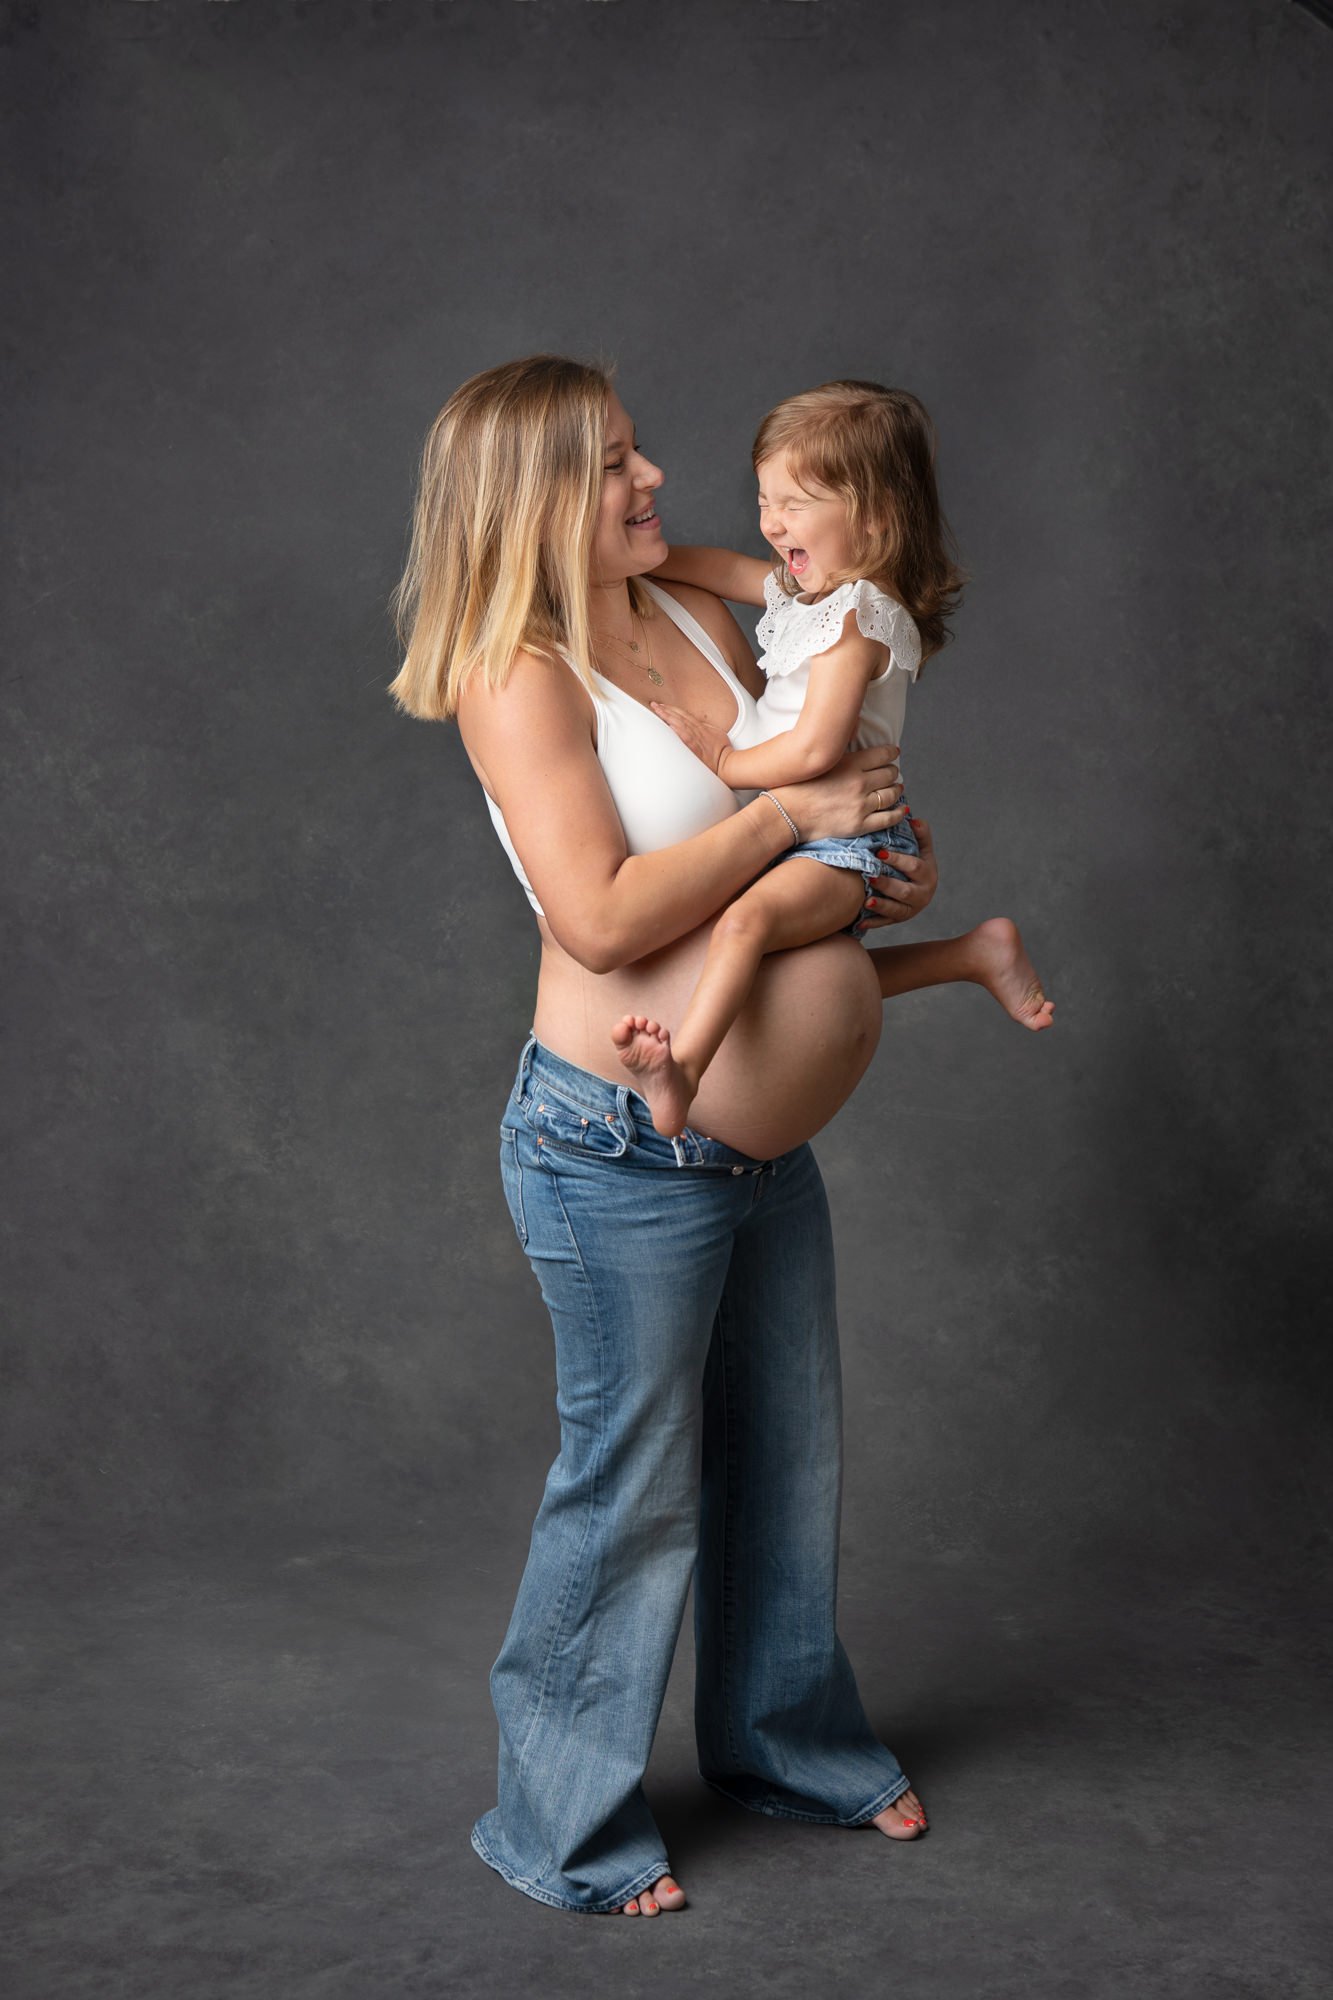  A big sister plays while sitting on her mommy's belly during a studio session in Northern NJ by Nicole Hawkins Photography. Northern NJ/ NY area maternity portraits big sister on belly #NicoleHawkinsPhotography #NicoleHawkinsMaternity #MaternityStud